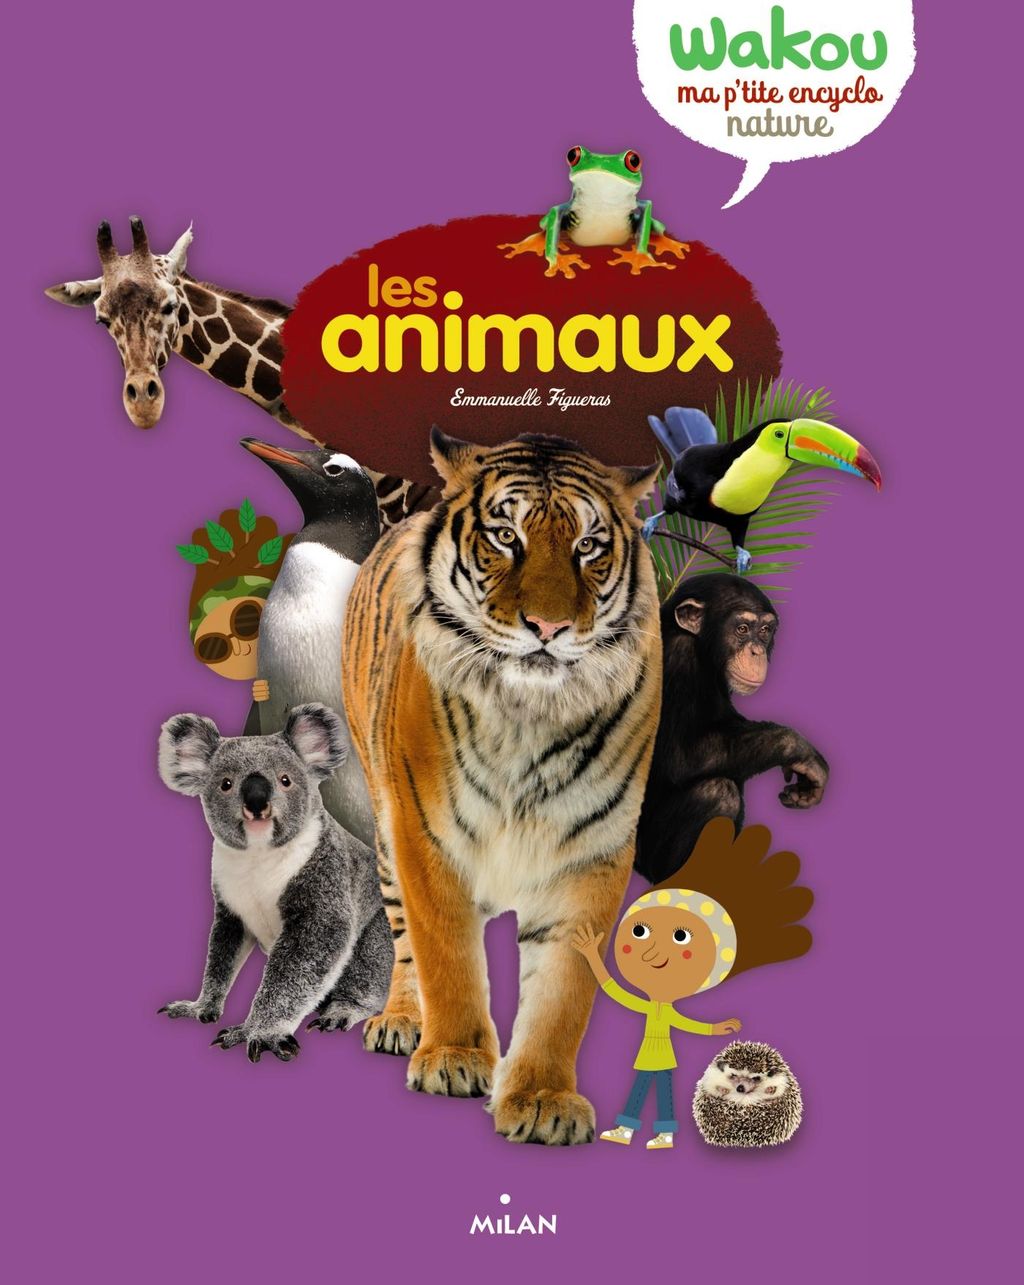 « Les animaux » cover